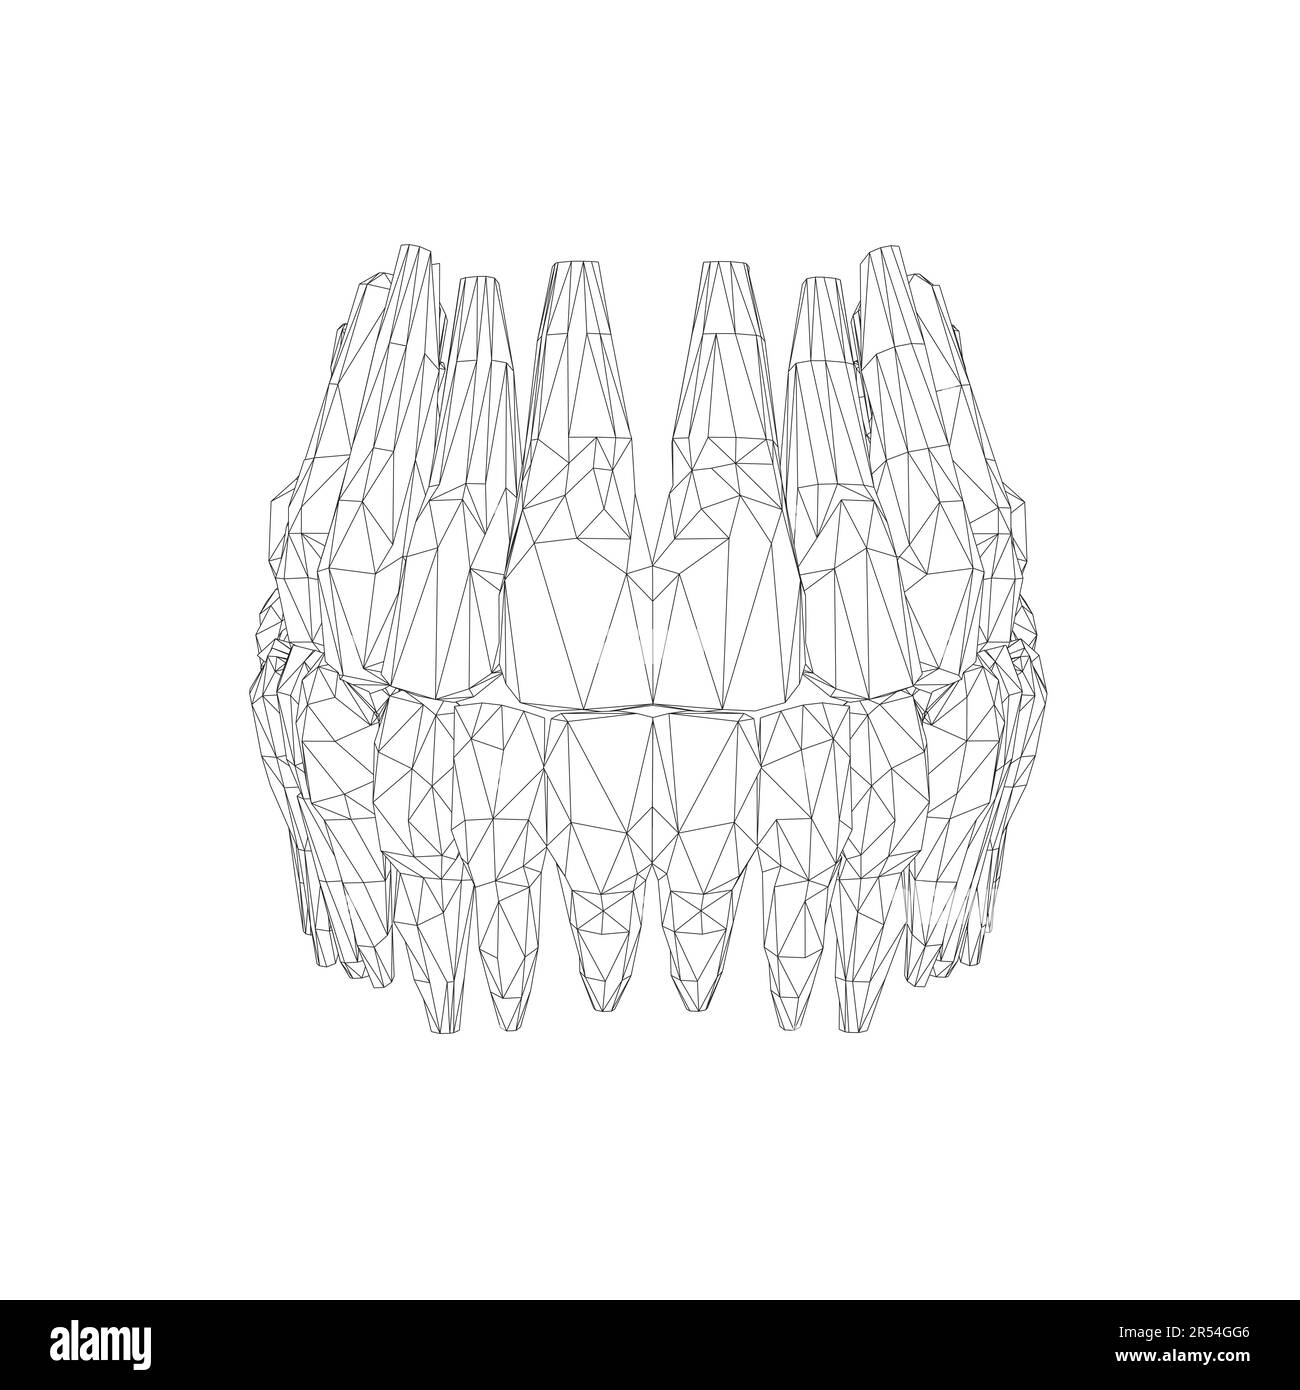 Teeth wireframe. Hand drawn different types of human tooth collection. Dentist graphic template. Engraving fangs and molars. Dental oral care. Toothac Stock Vector